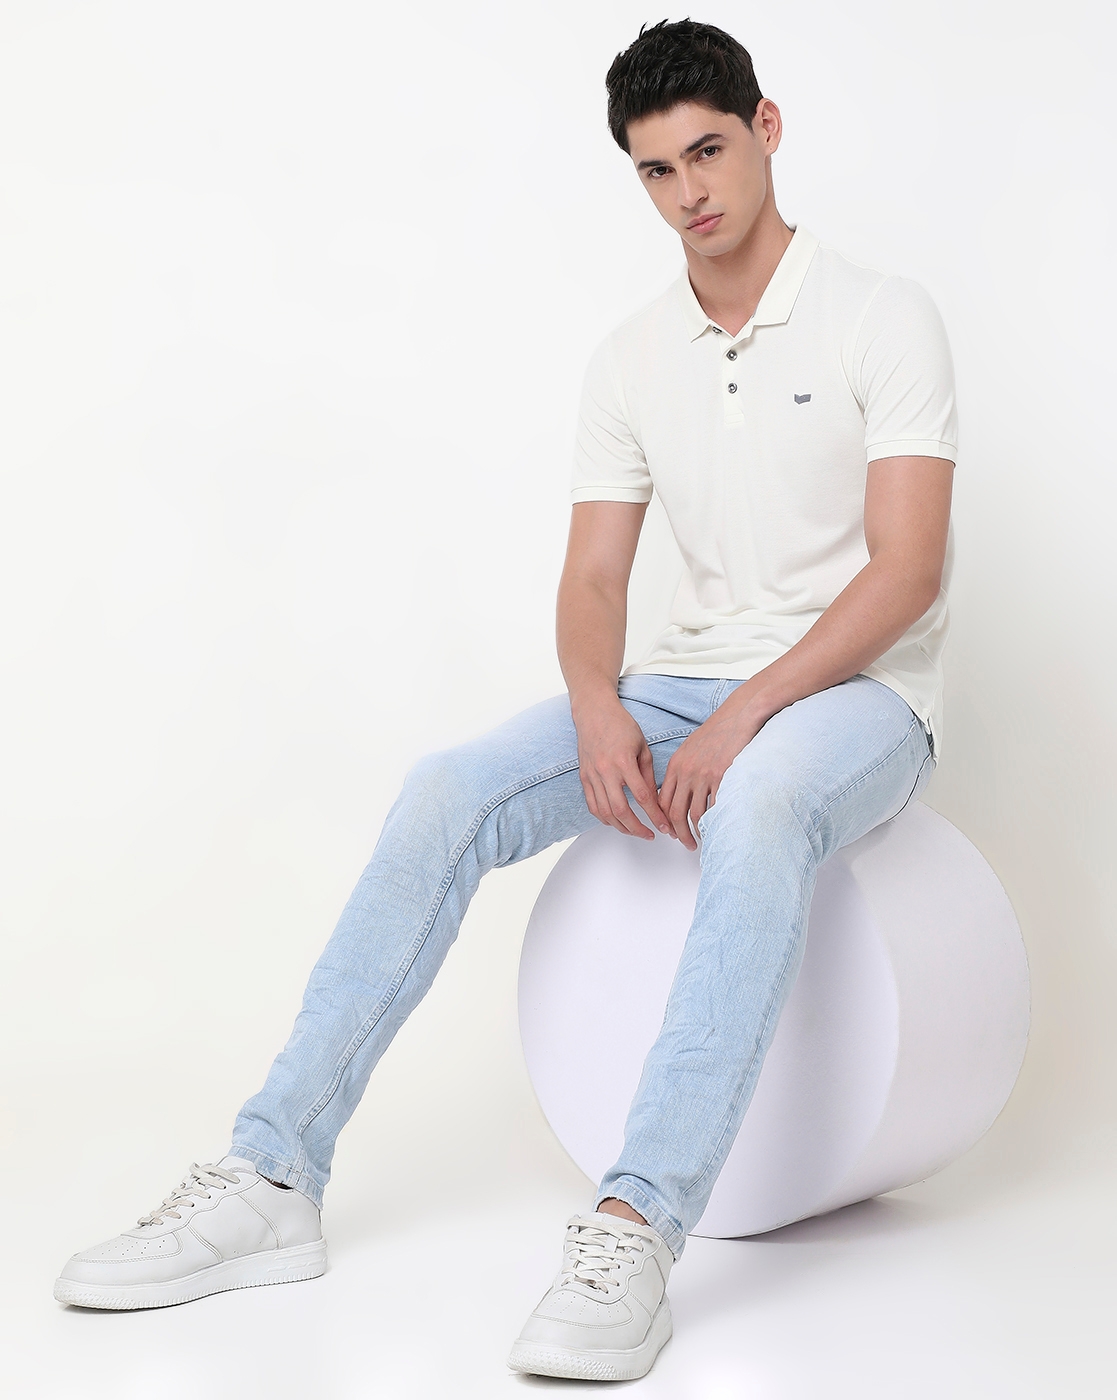 GAS | Regular Fit Solid Polo T-Shirt with Short Sleeve